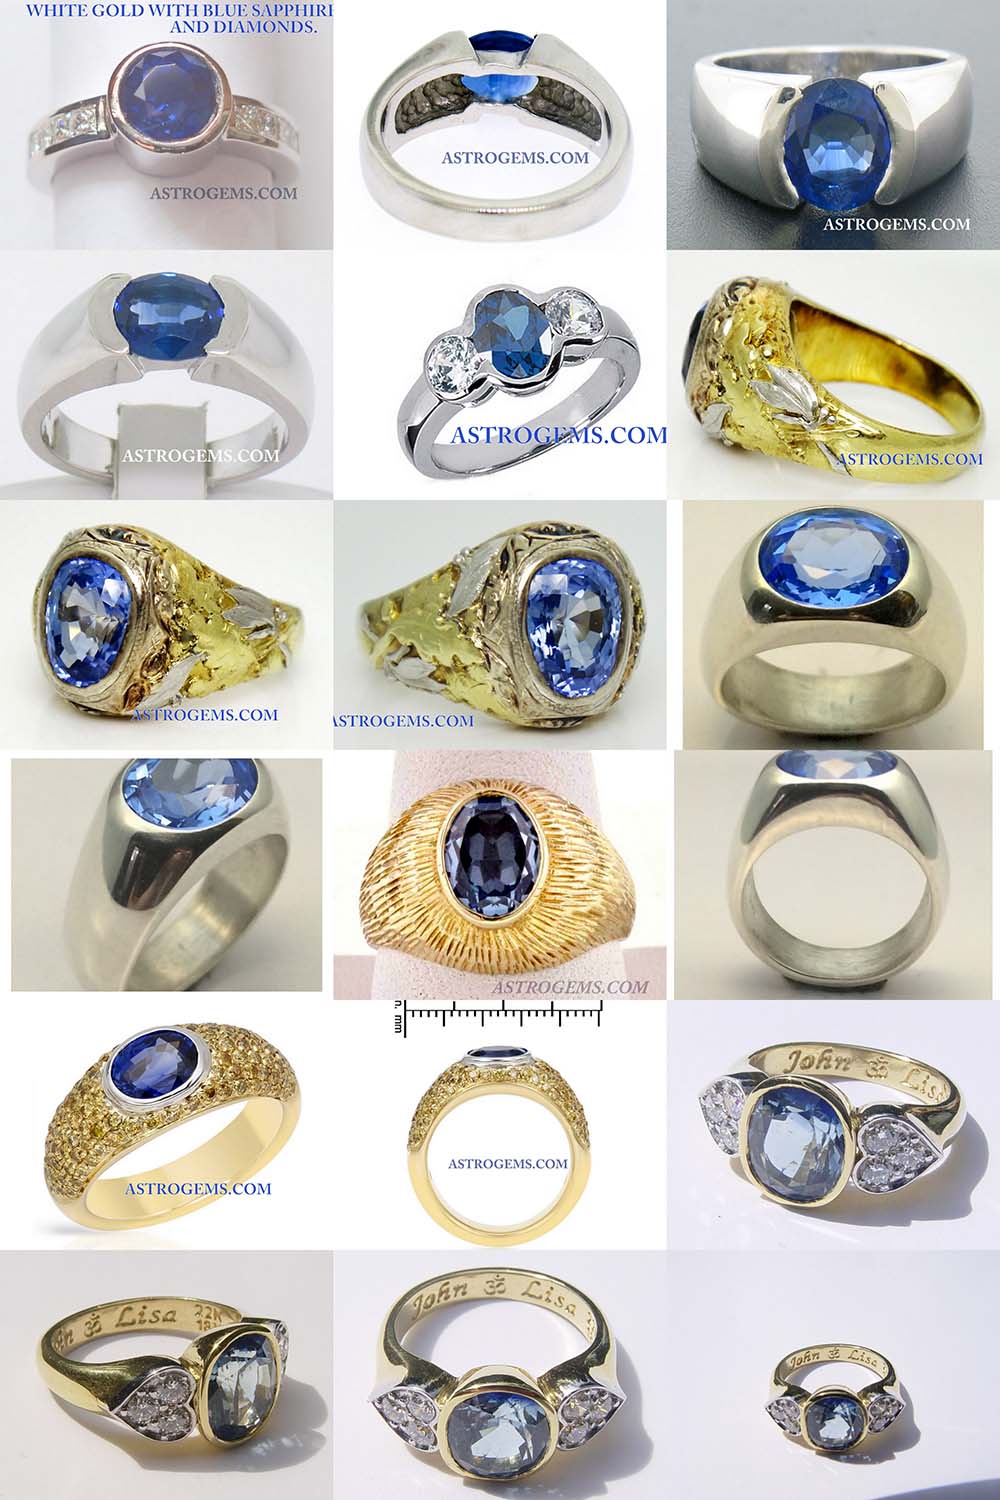 Astrogems makes many kinds of astrological blue sapphire rings and can create custom designs as well.